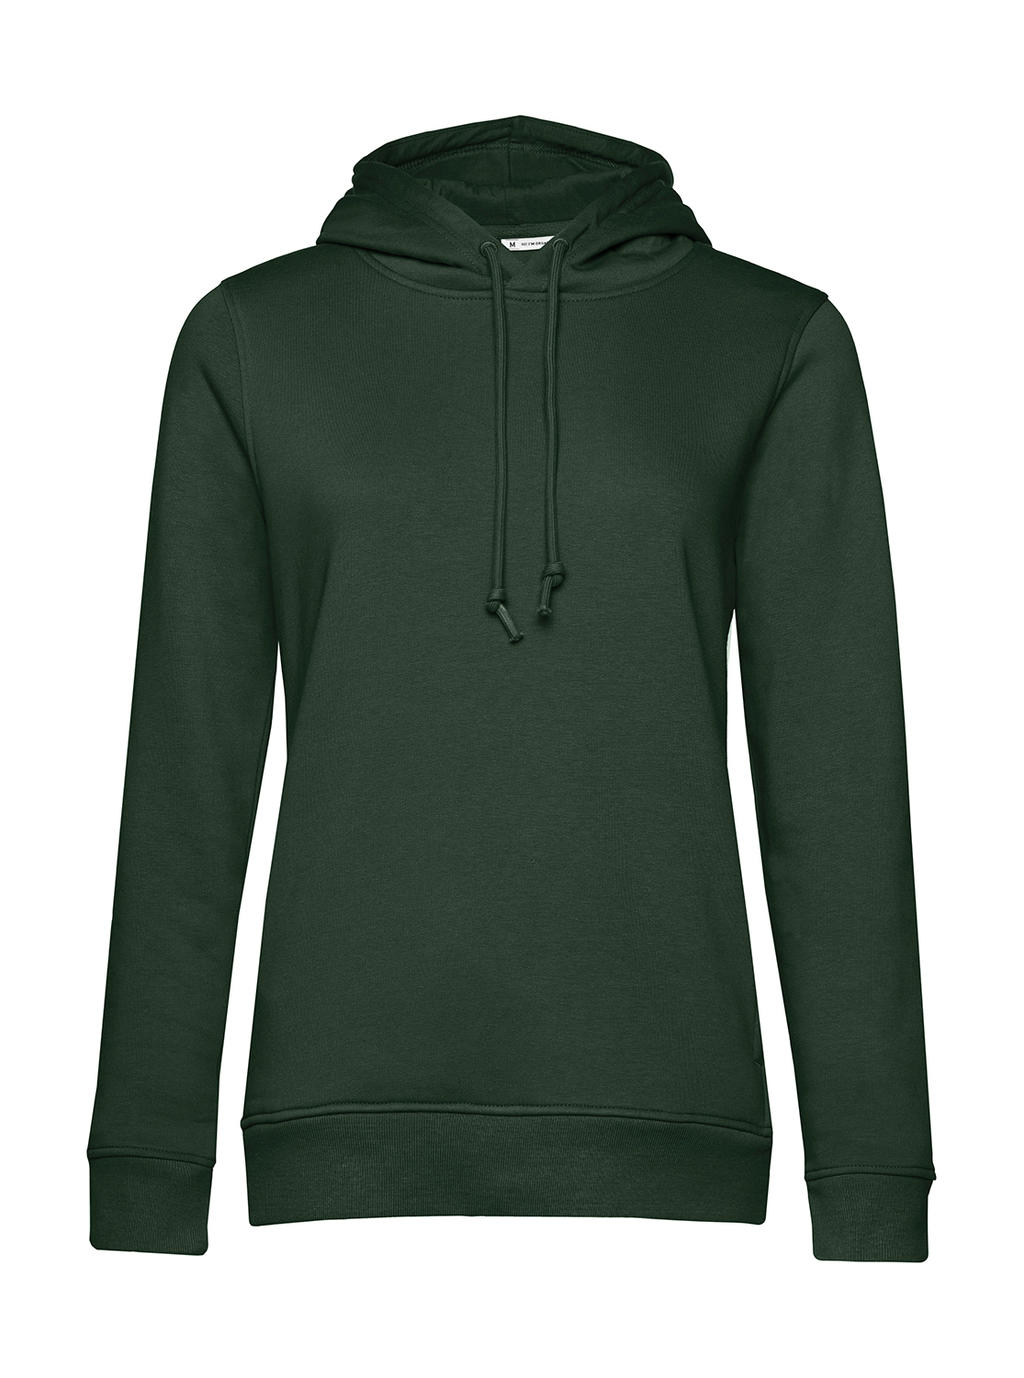 Mikina Organic Inspire Hooded /women - forest green